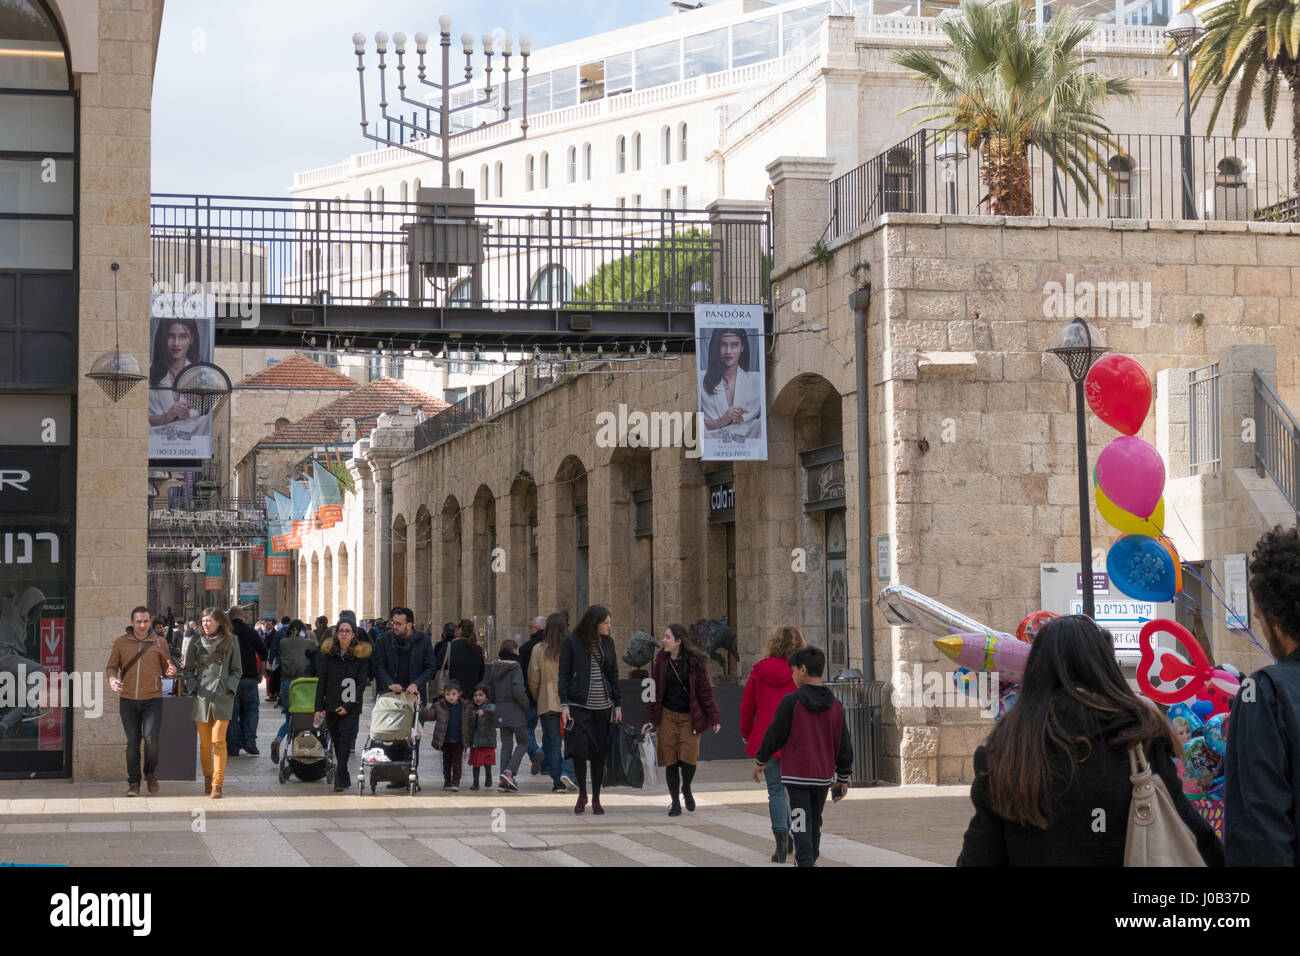 Shoppers and tourists at Mamilla shopping street. Located by Jaffa gate, Mamilla Avenue, is an upscale shopping street and the only open-air mall in J Stock Photo